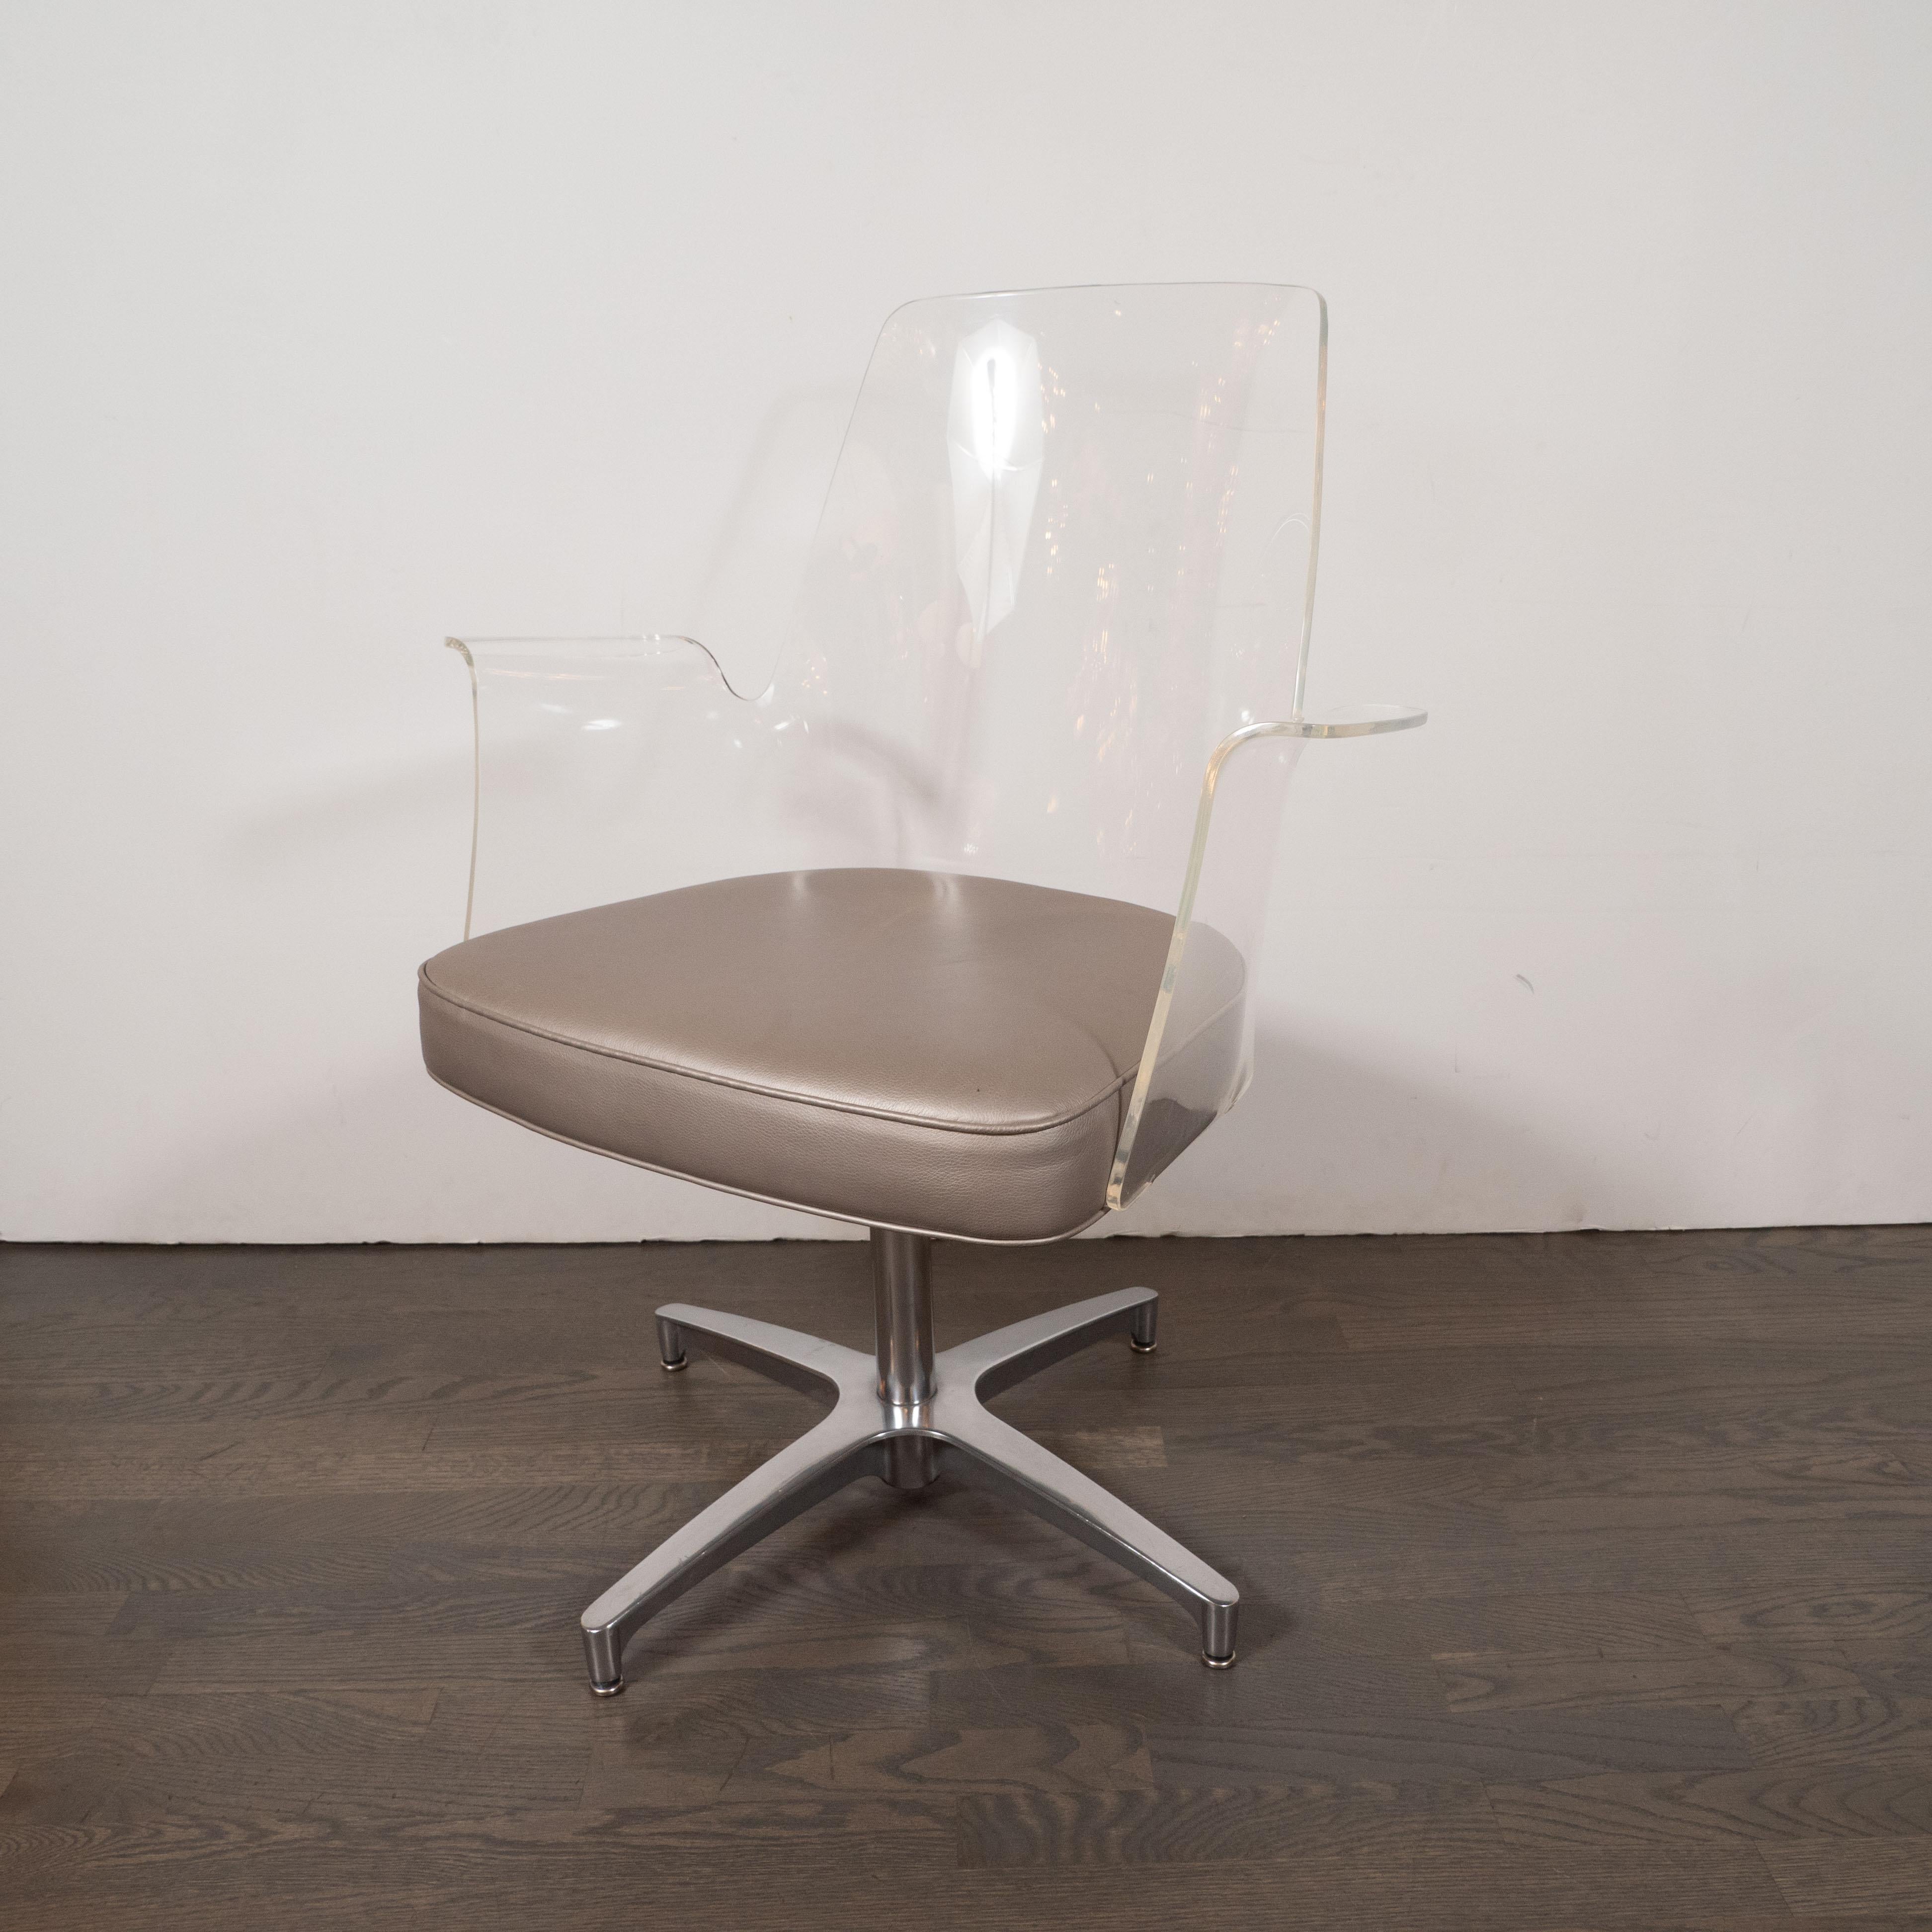 Late 20th Century Mid-Century Modern Lucite, Metallic Leather and Chrome X- Form Side Chair